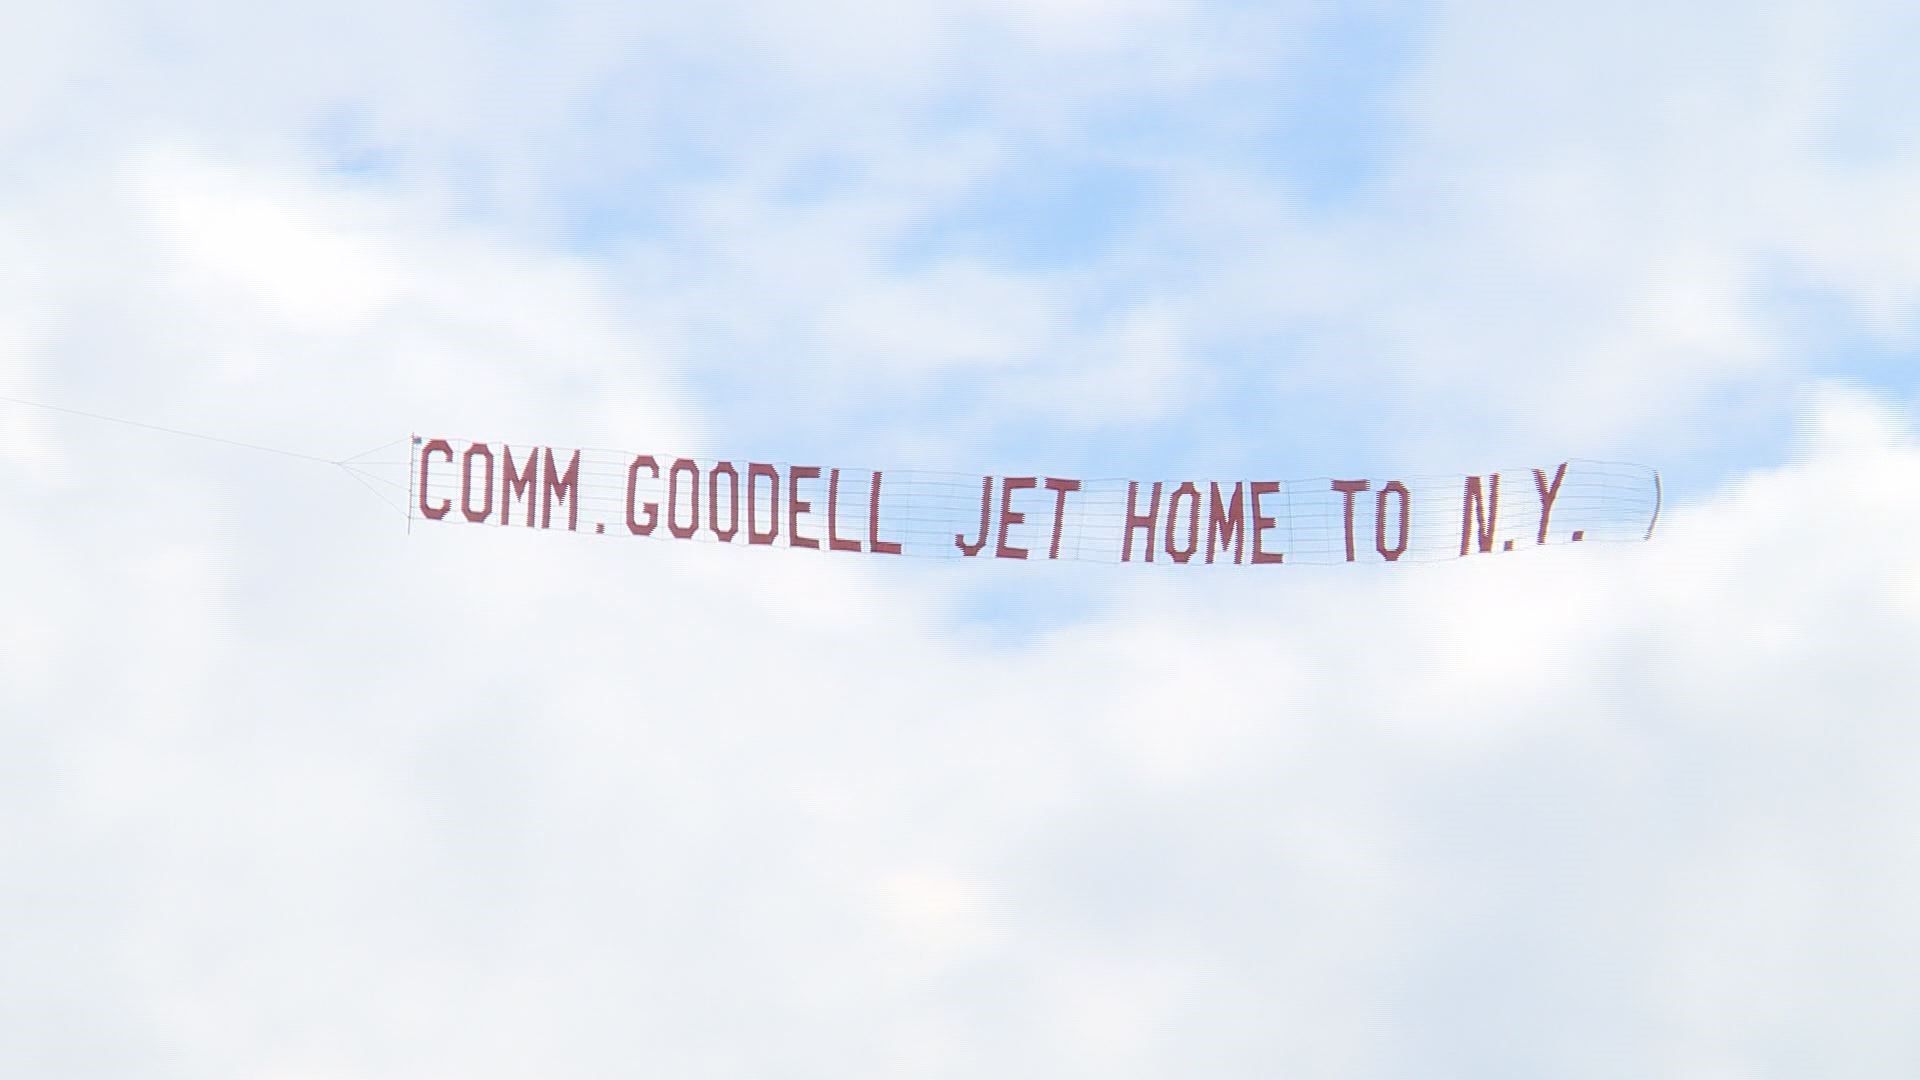 A less-than-neighborly message was delivered by plane to the Scarborough vacation home of NFL Commissioner Roger Goodell during the uproar over Deflategate in 2015.